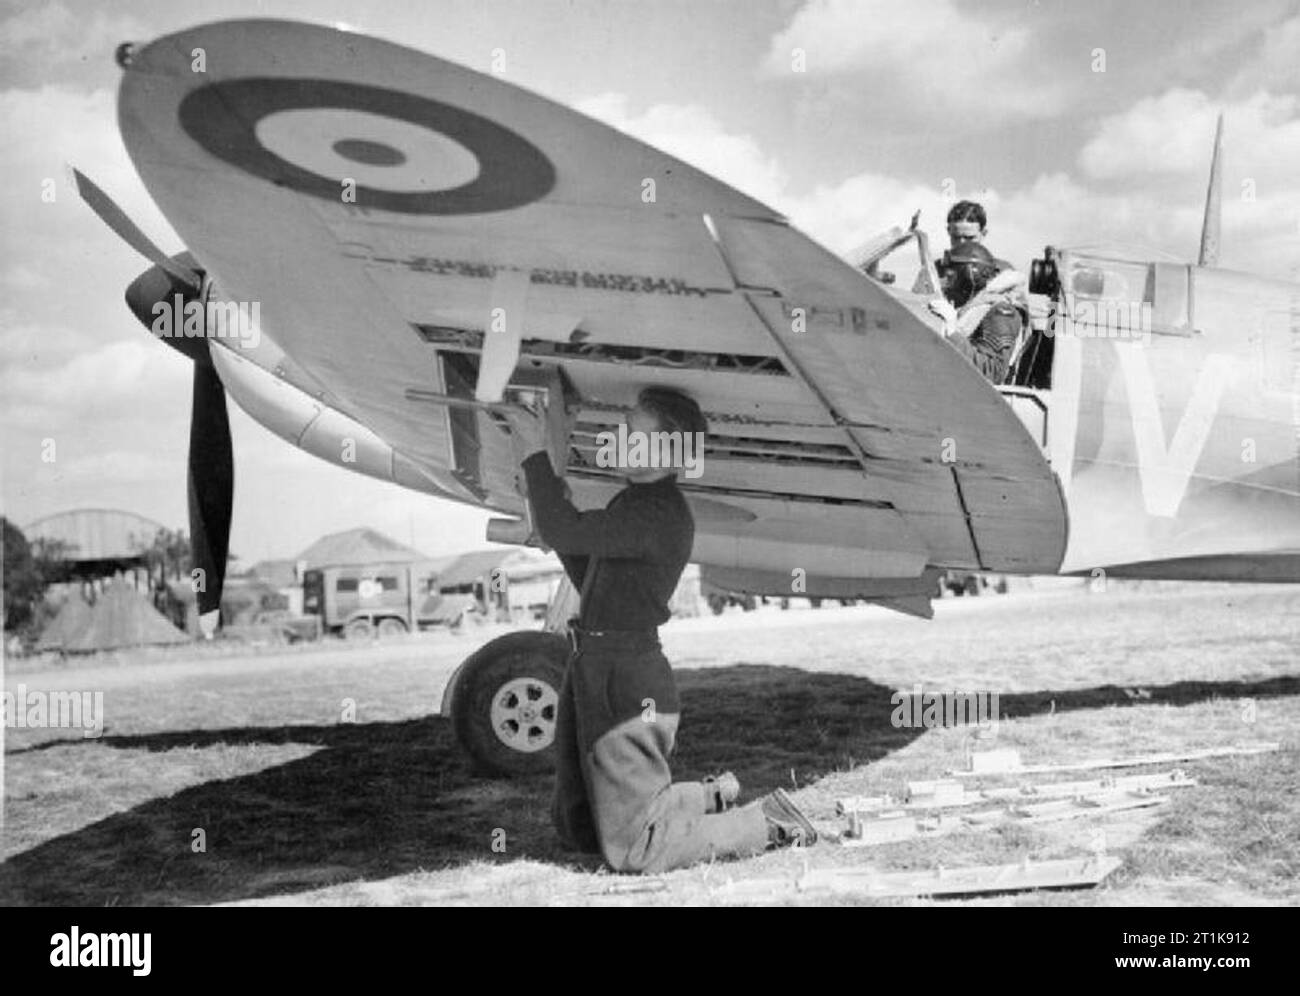 Royal Air Force Fighter Command, 1939-1945. Armourer Fred Roberts re-arms Supermarine Spitfire Mark IA, X4474 'QV-I', of No. 19 Squadron RAF at Fowlmere, Cambridgeshire, while the pilot, Sergeant B J Jennings, has a word with his mechanic. Manor Farm can be seen in the background. Stock Photo